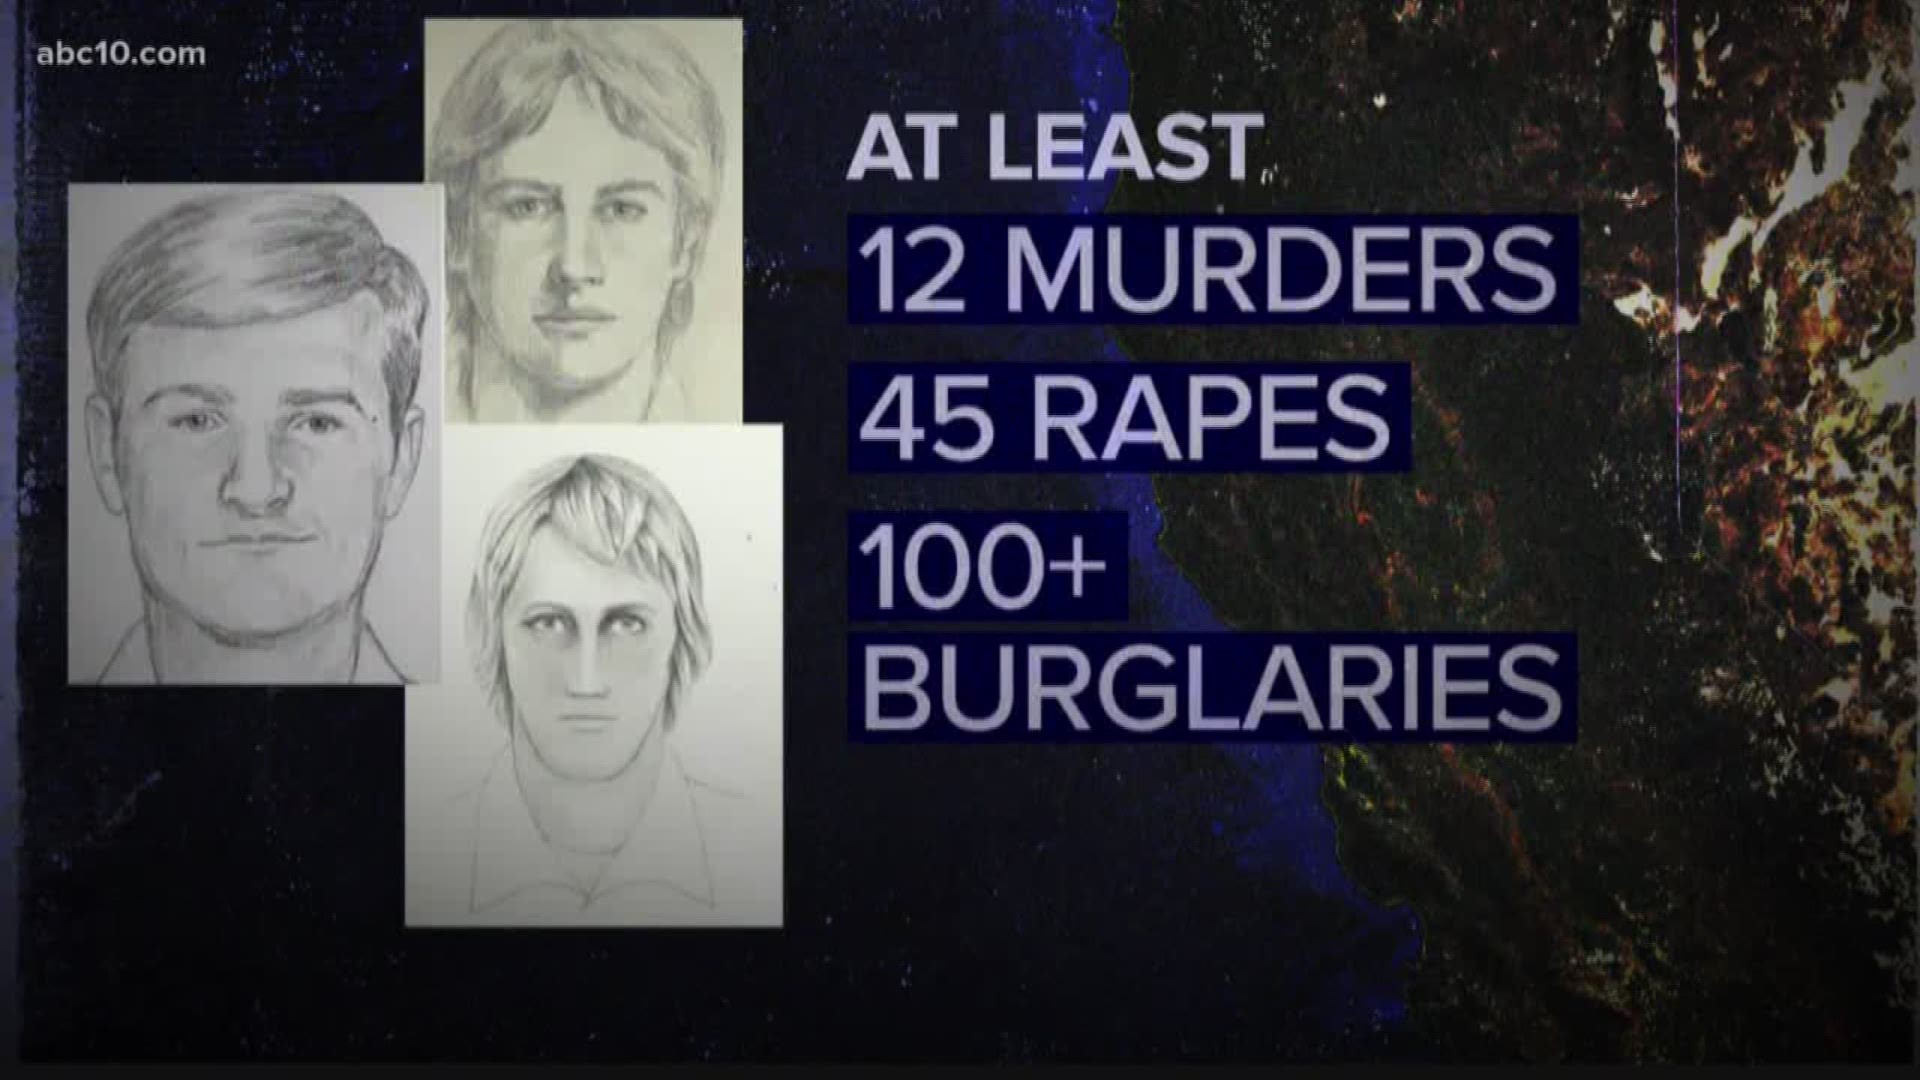 Joseph James DeAngelo, a former police officer, is behind bars and is suspected of being the East Area Rapist-Golden State Killer.